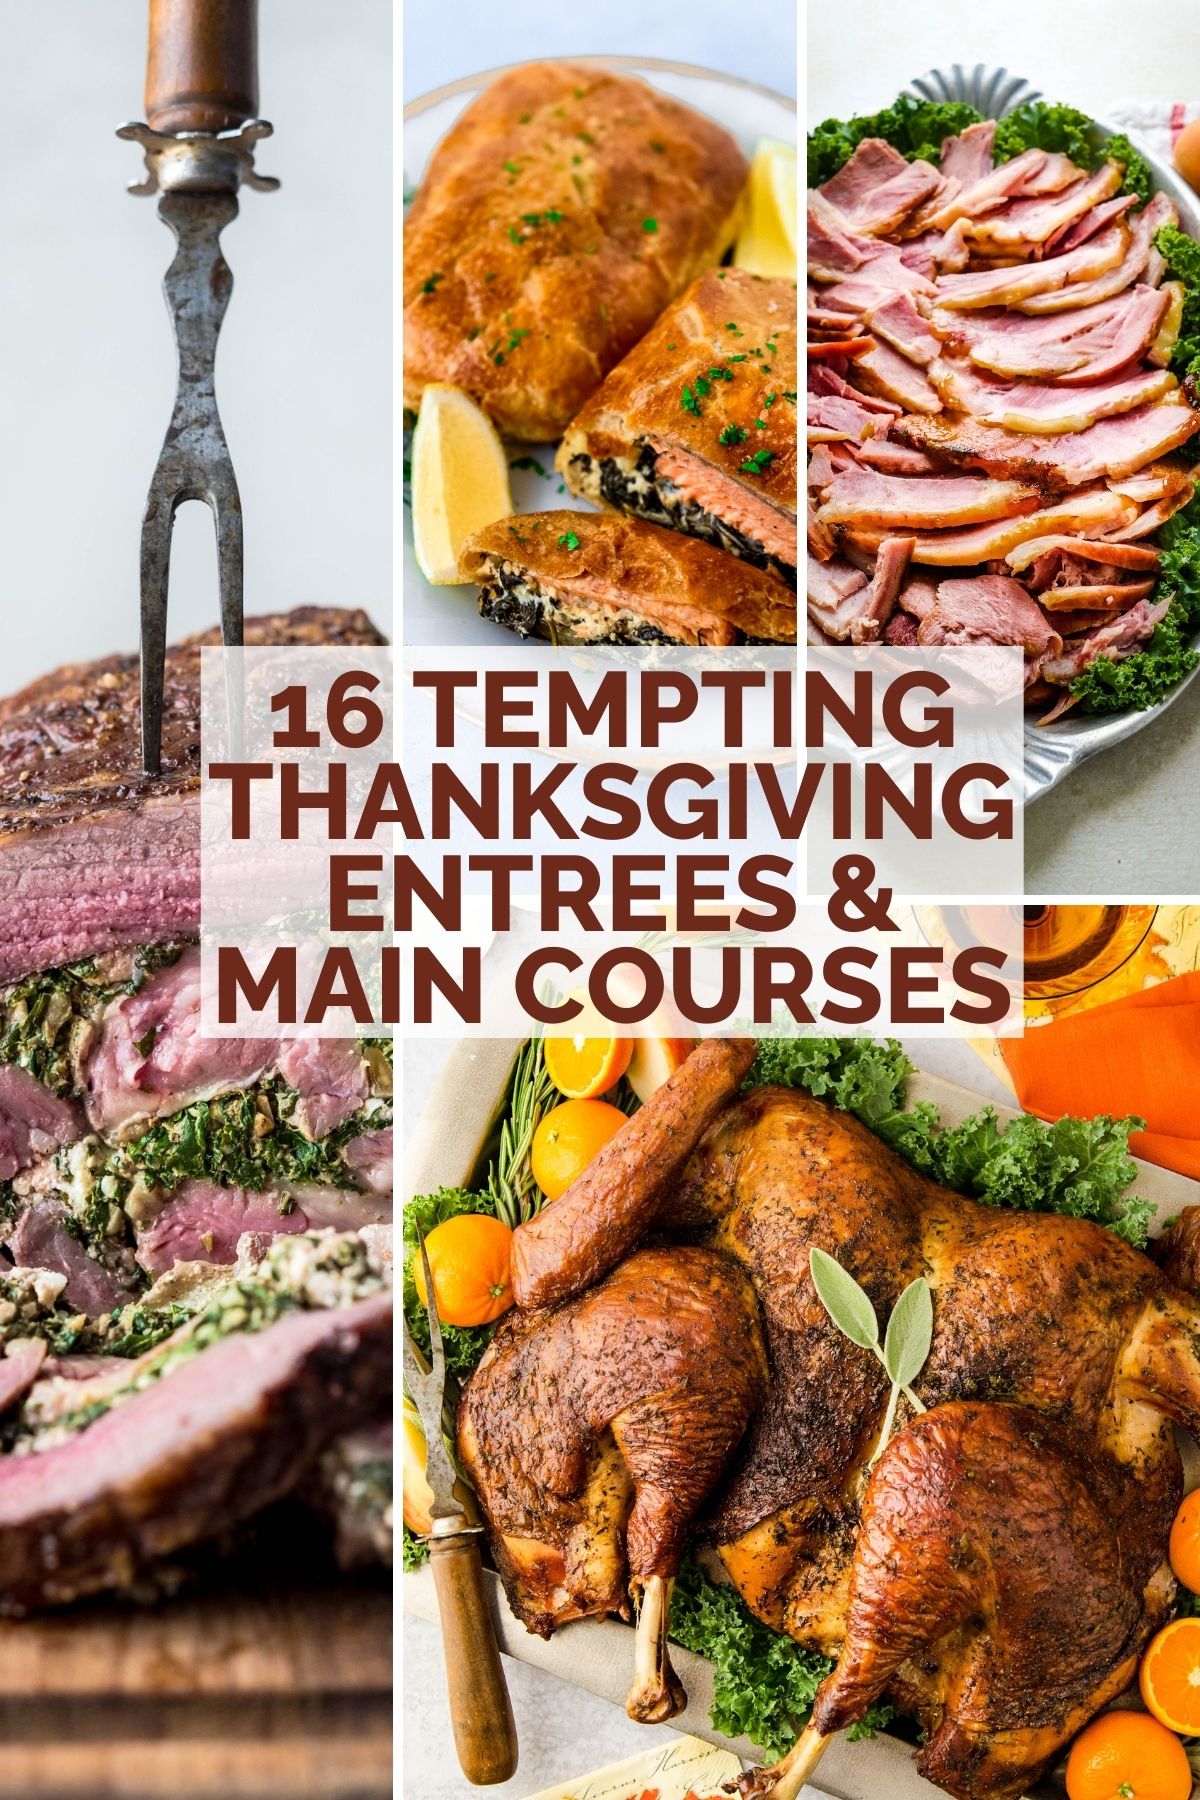 16 Tempting Thanksgiving Entrees and Main Courses